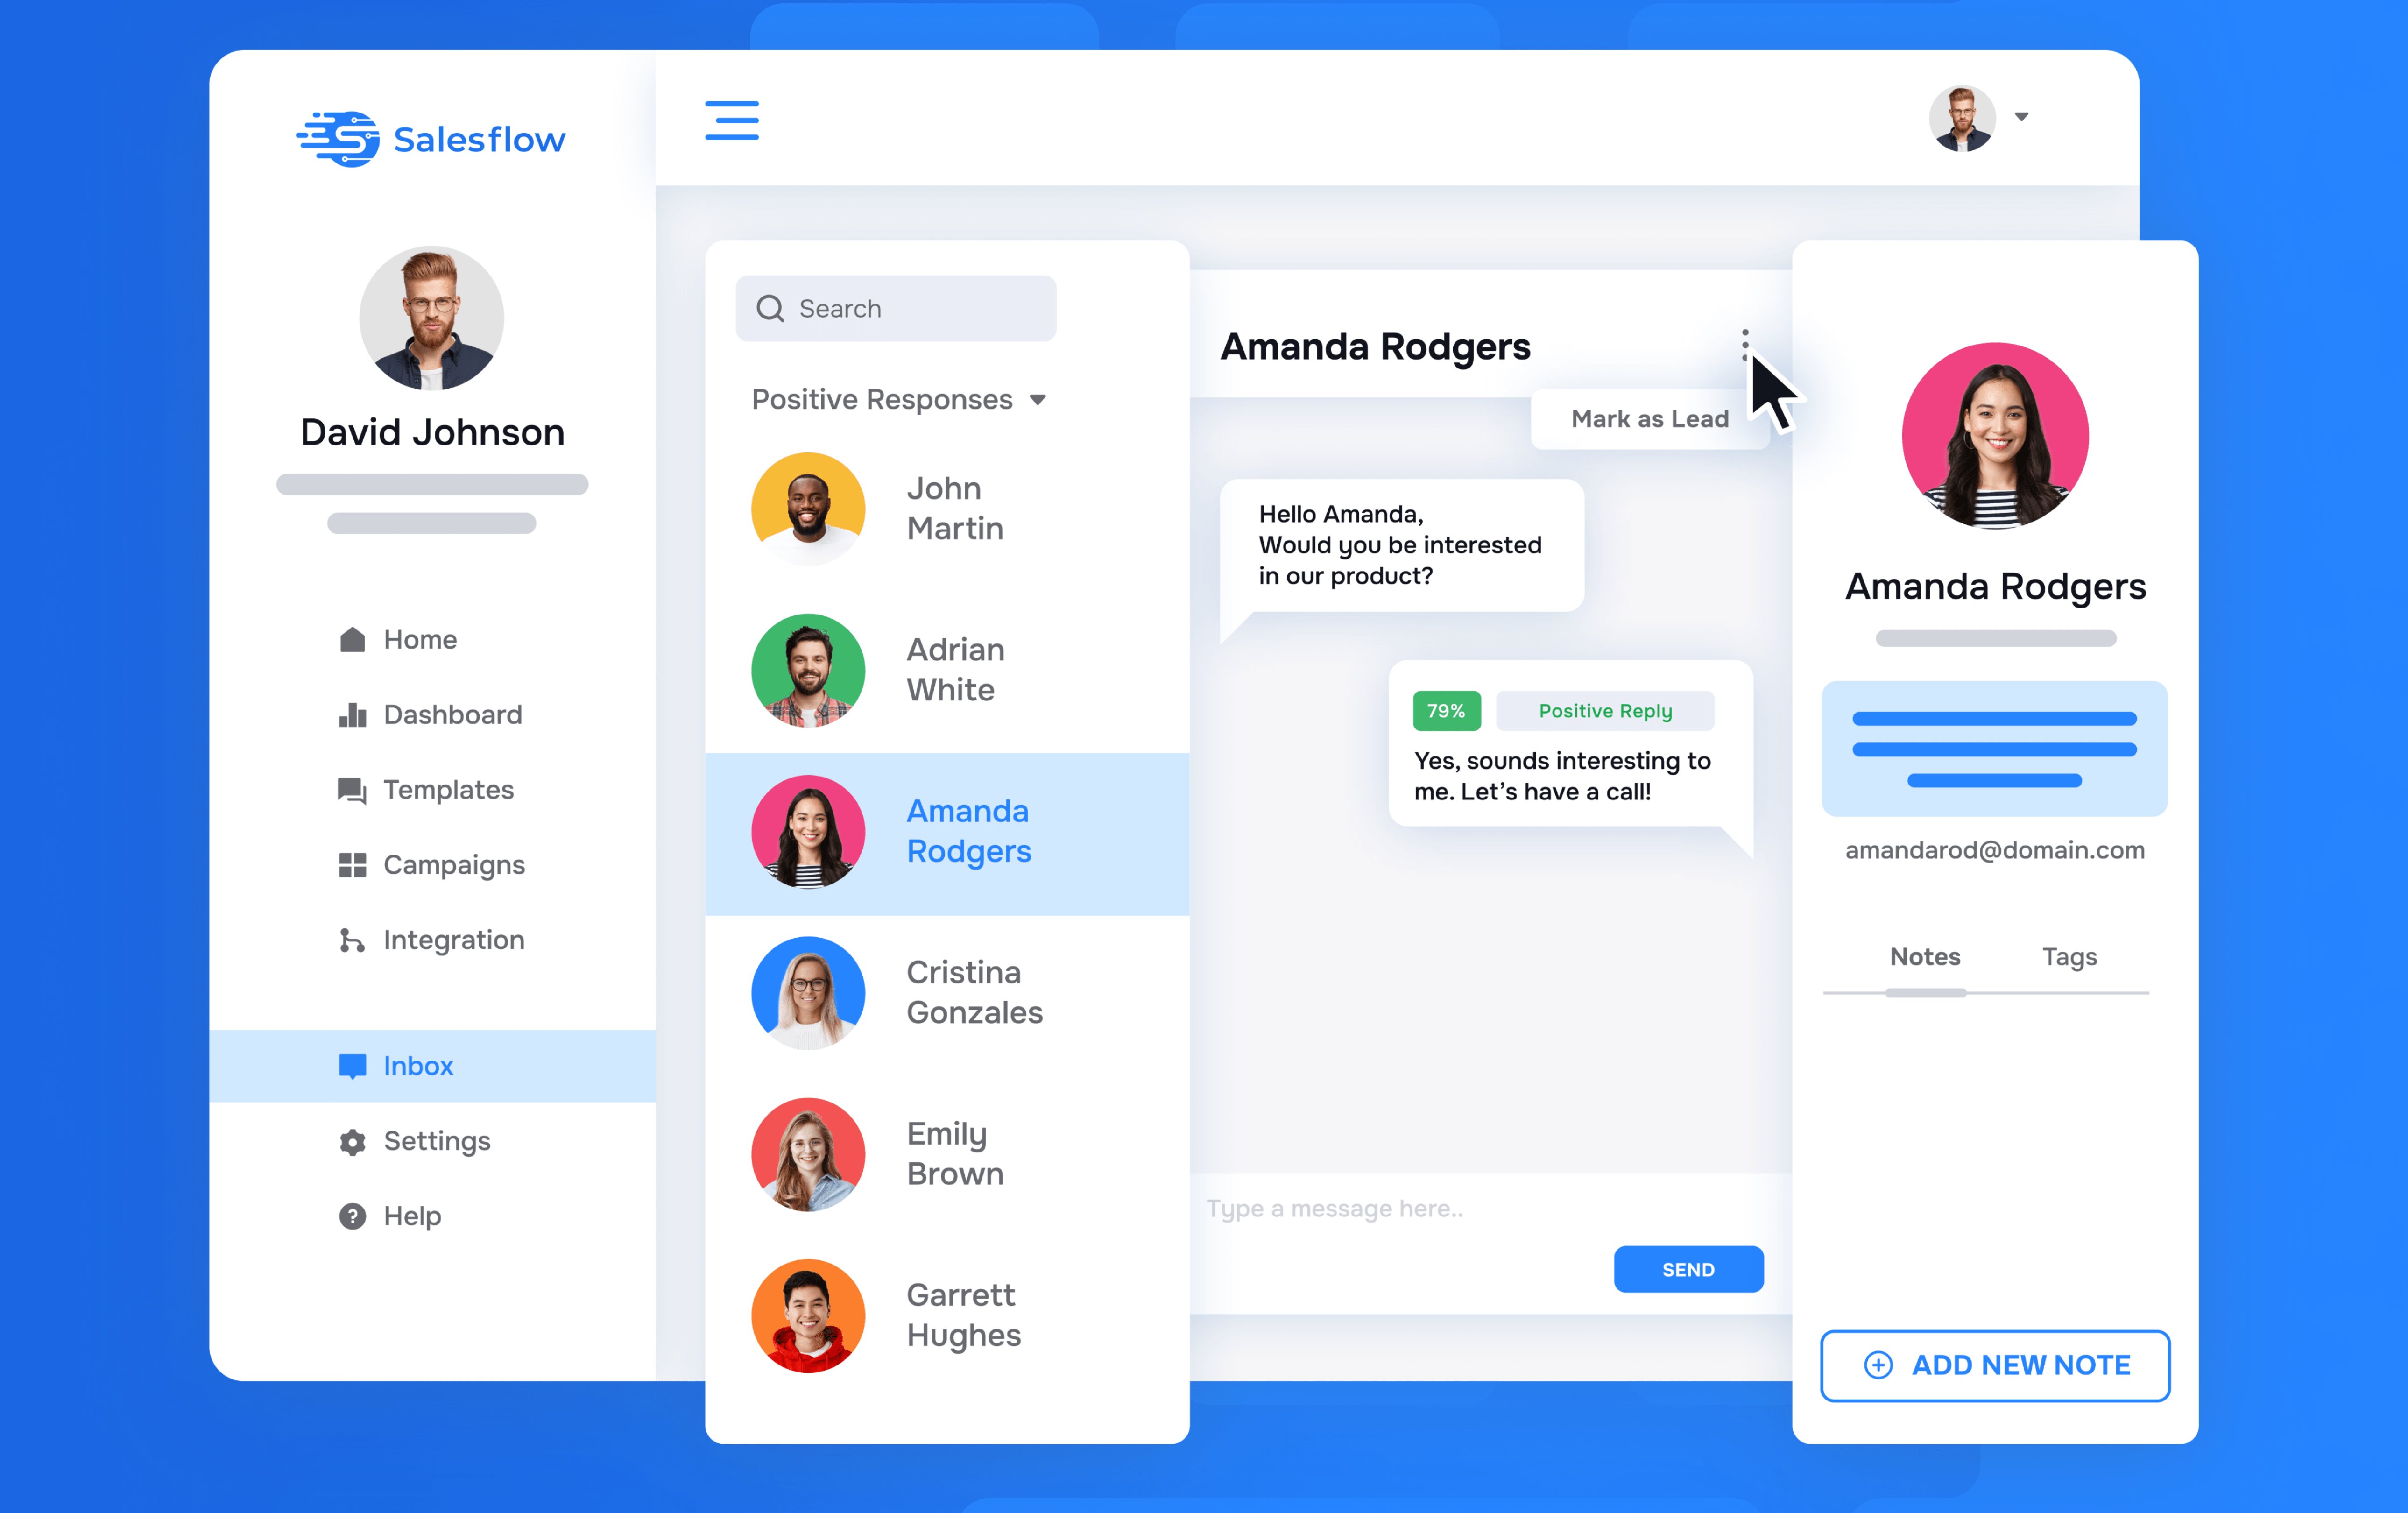 Smart & customisable inbox & chat. The convenience of managing all your LinkedIn automation from one place. AI reply detection, advanced filters, tags. No need to check your LinkedIn inbox!